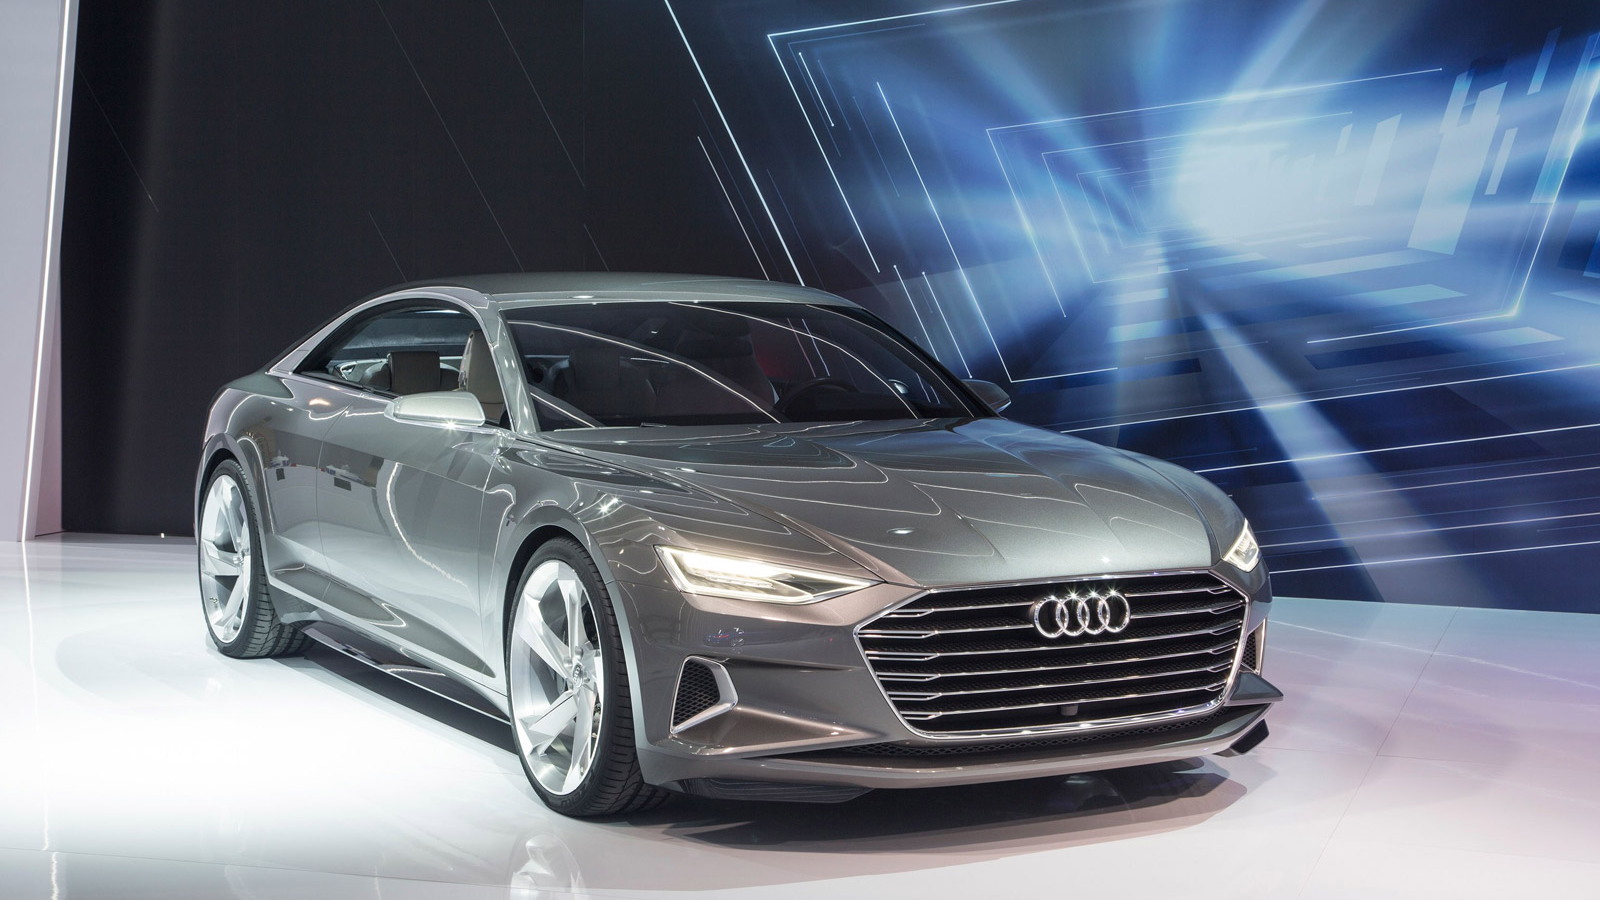 Audi Prologue Piloted Driving concept, 2015 Consumer Electronics Show